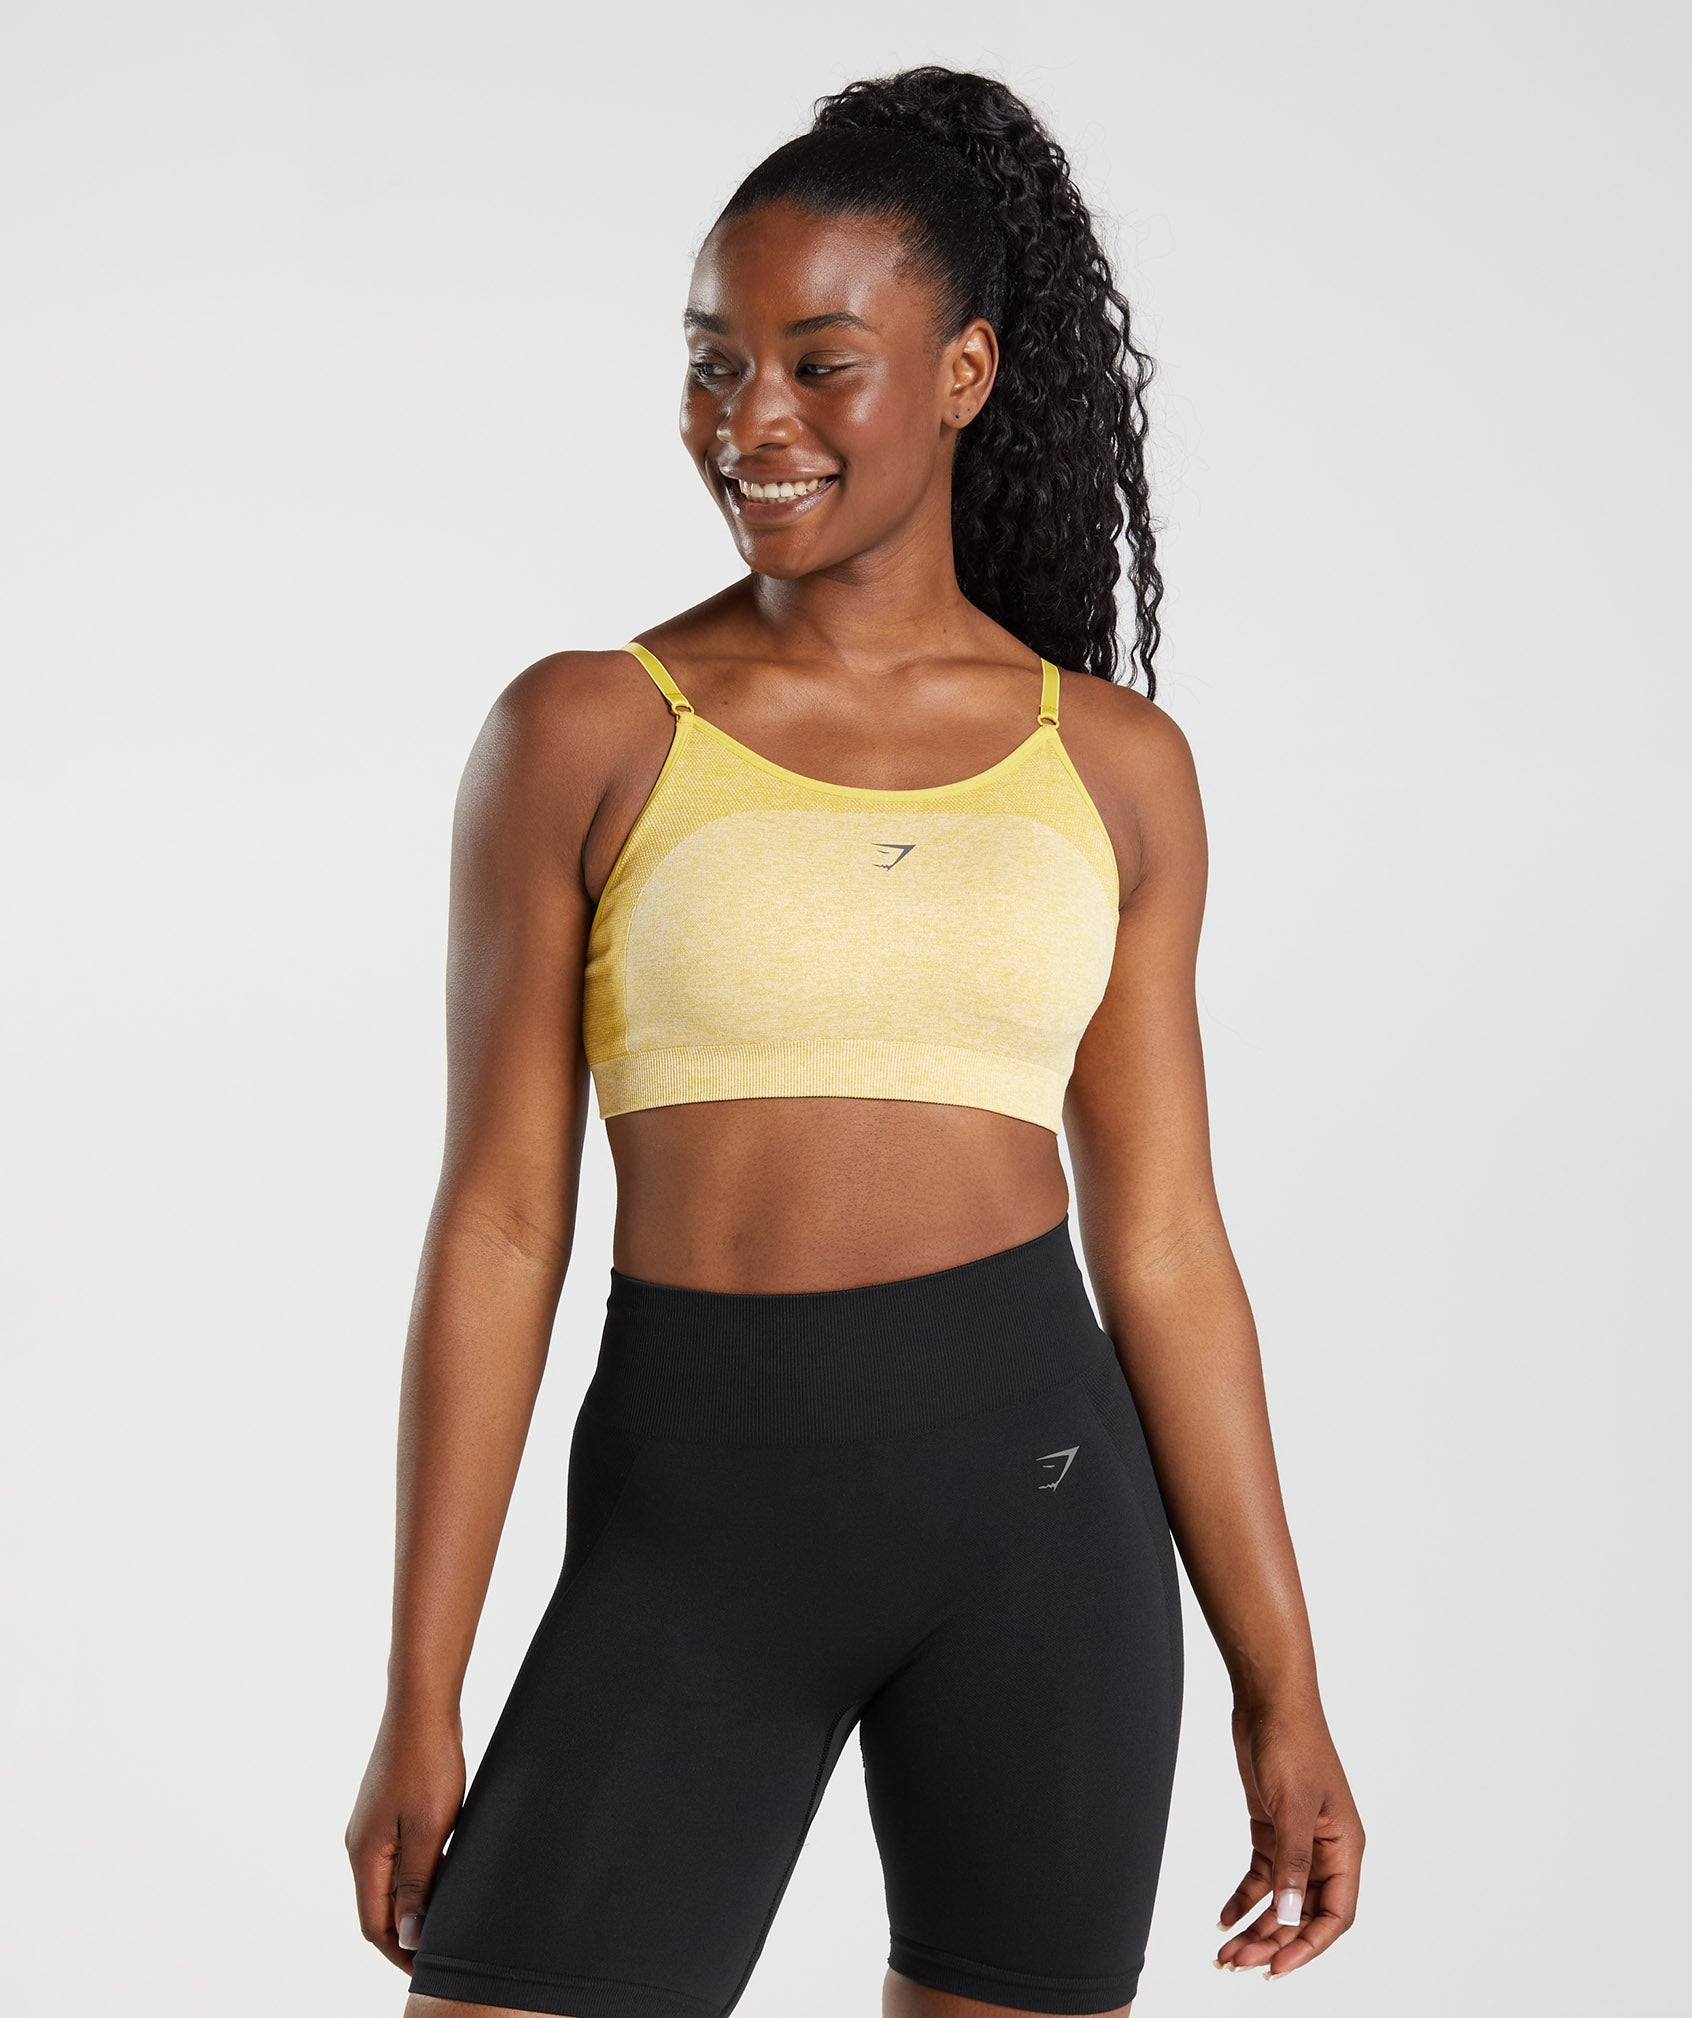 Gymshark ruched sports bra firefly green - $38 - From Flipped